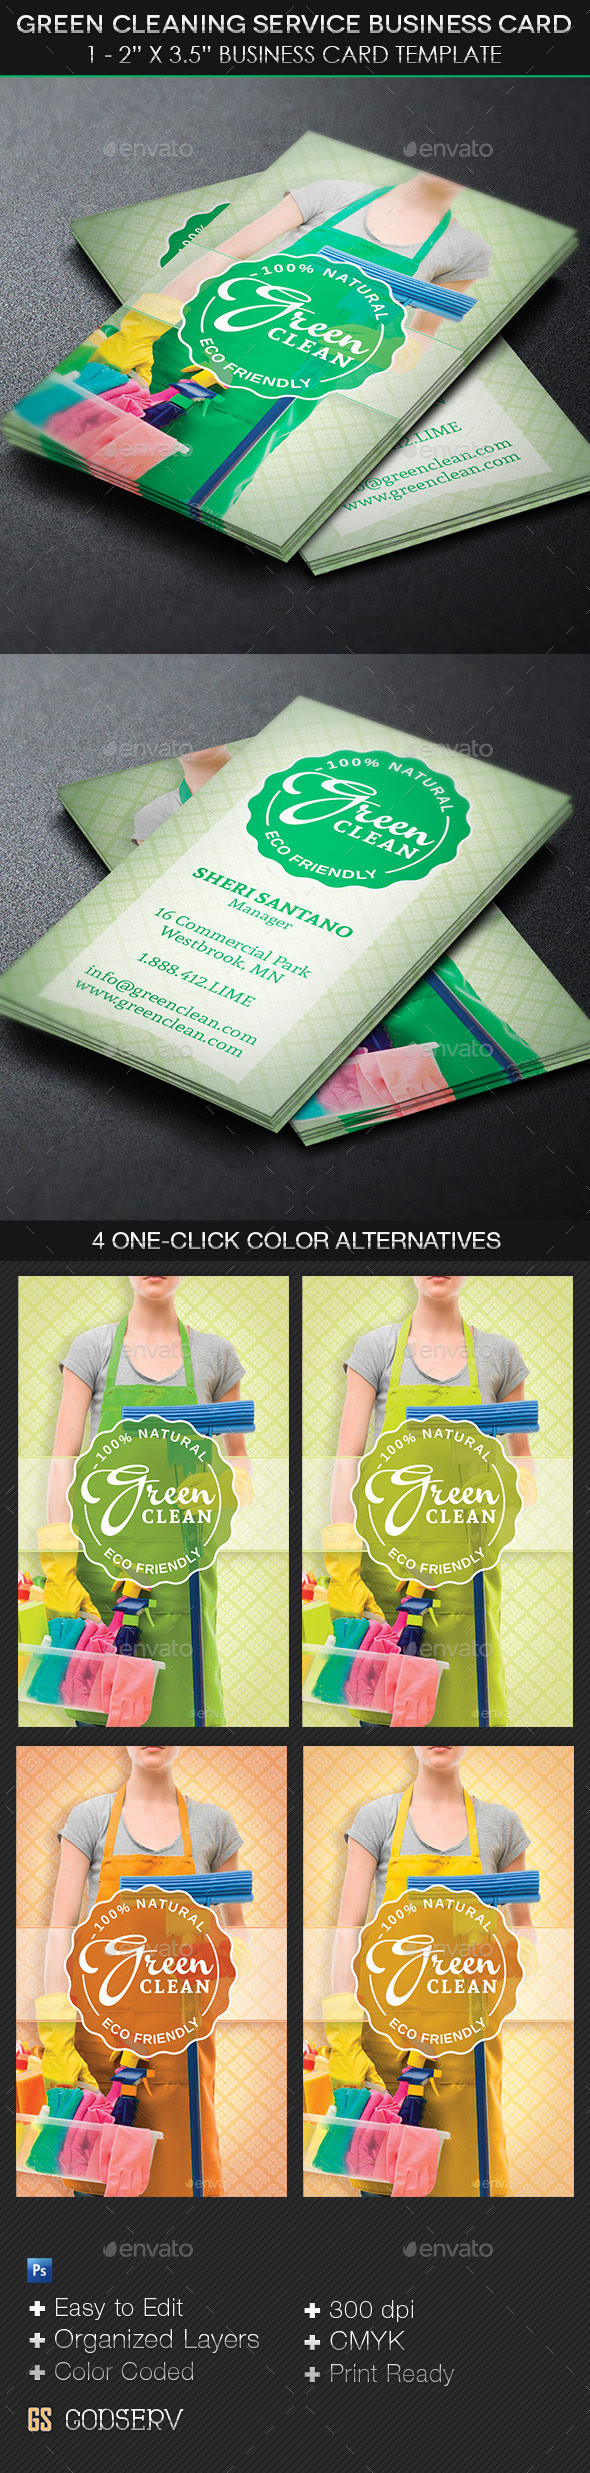 Green cleaning service business card template preview